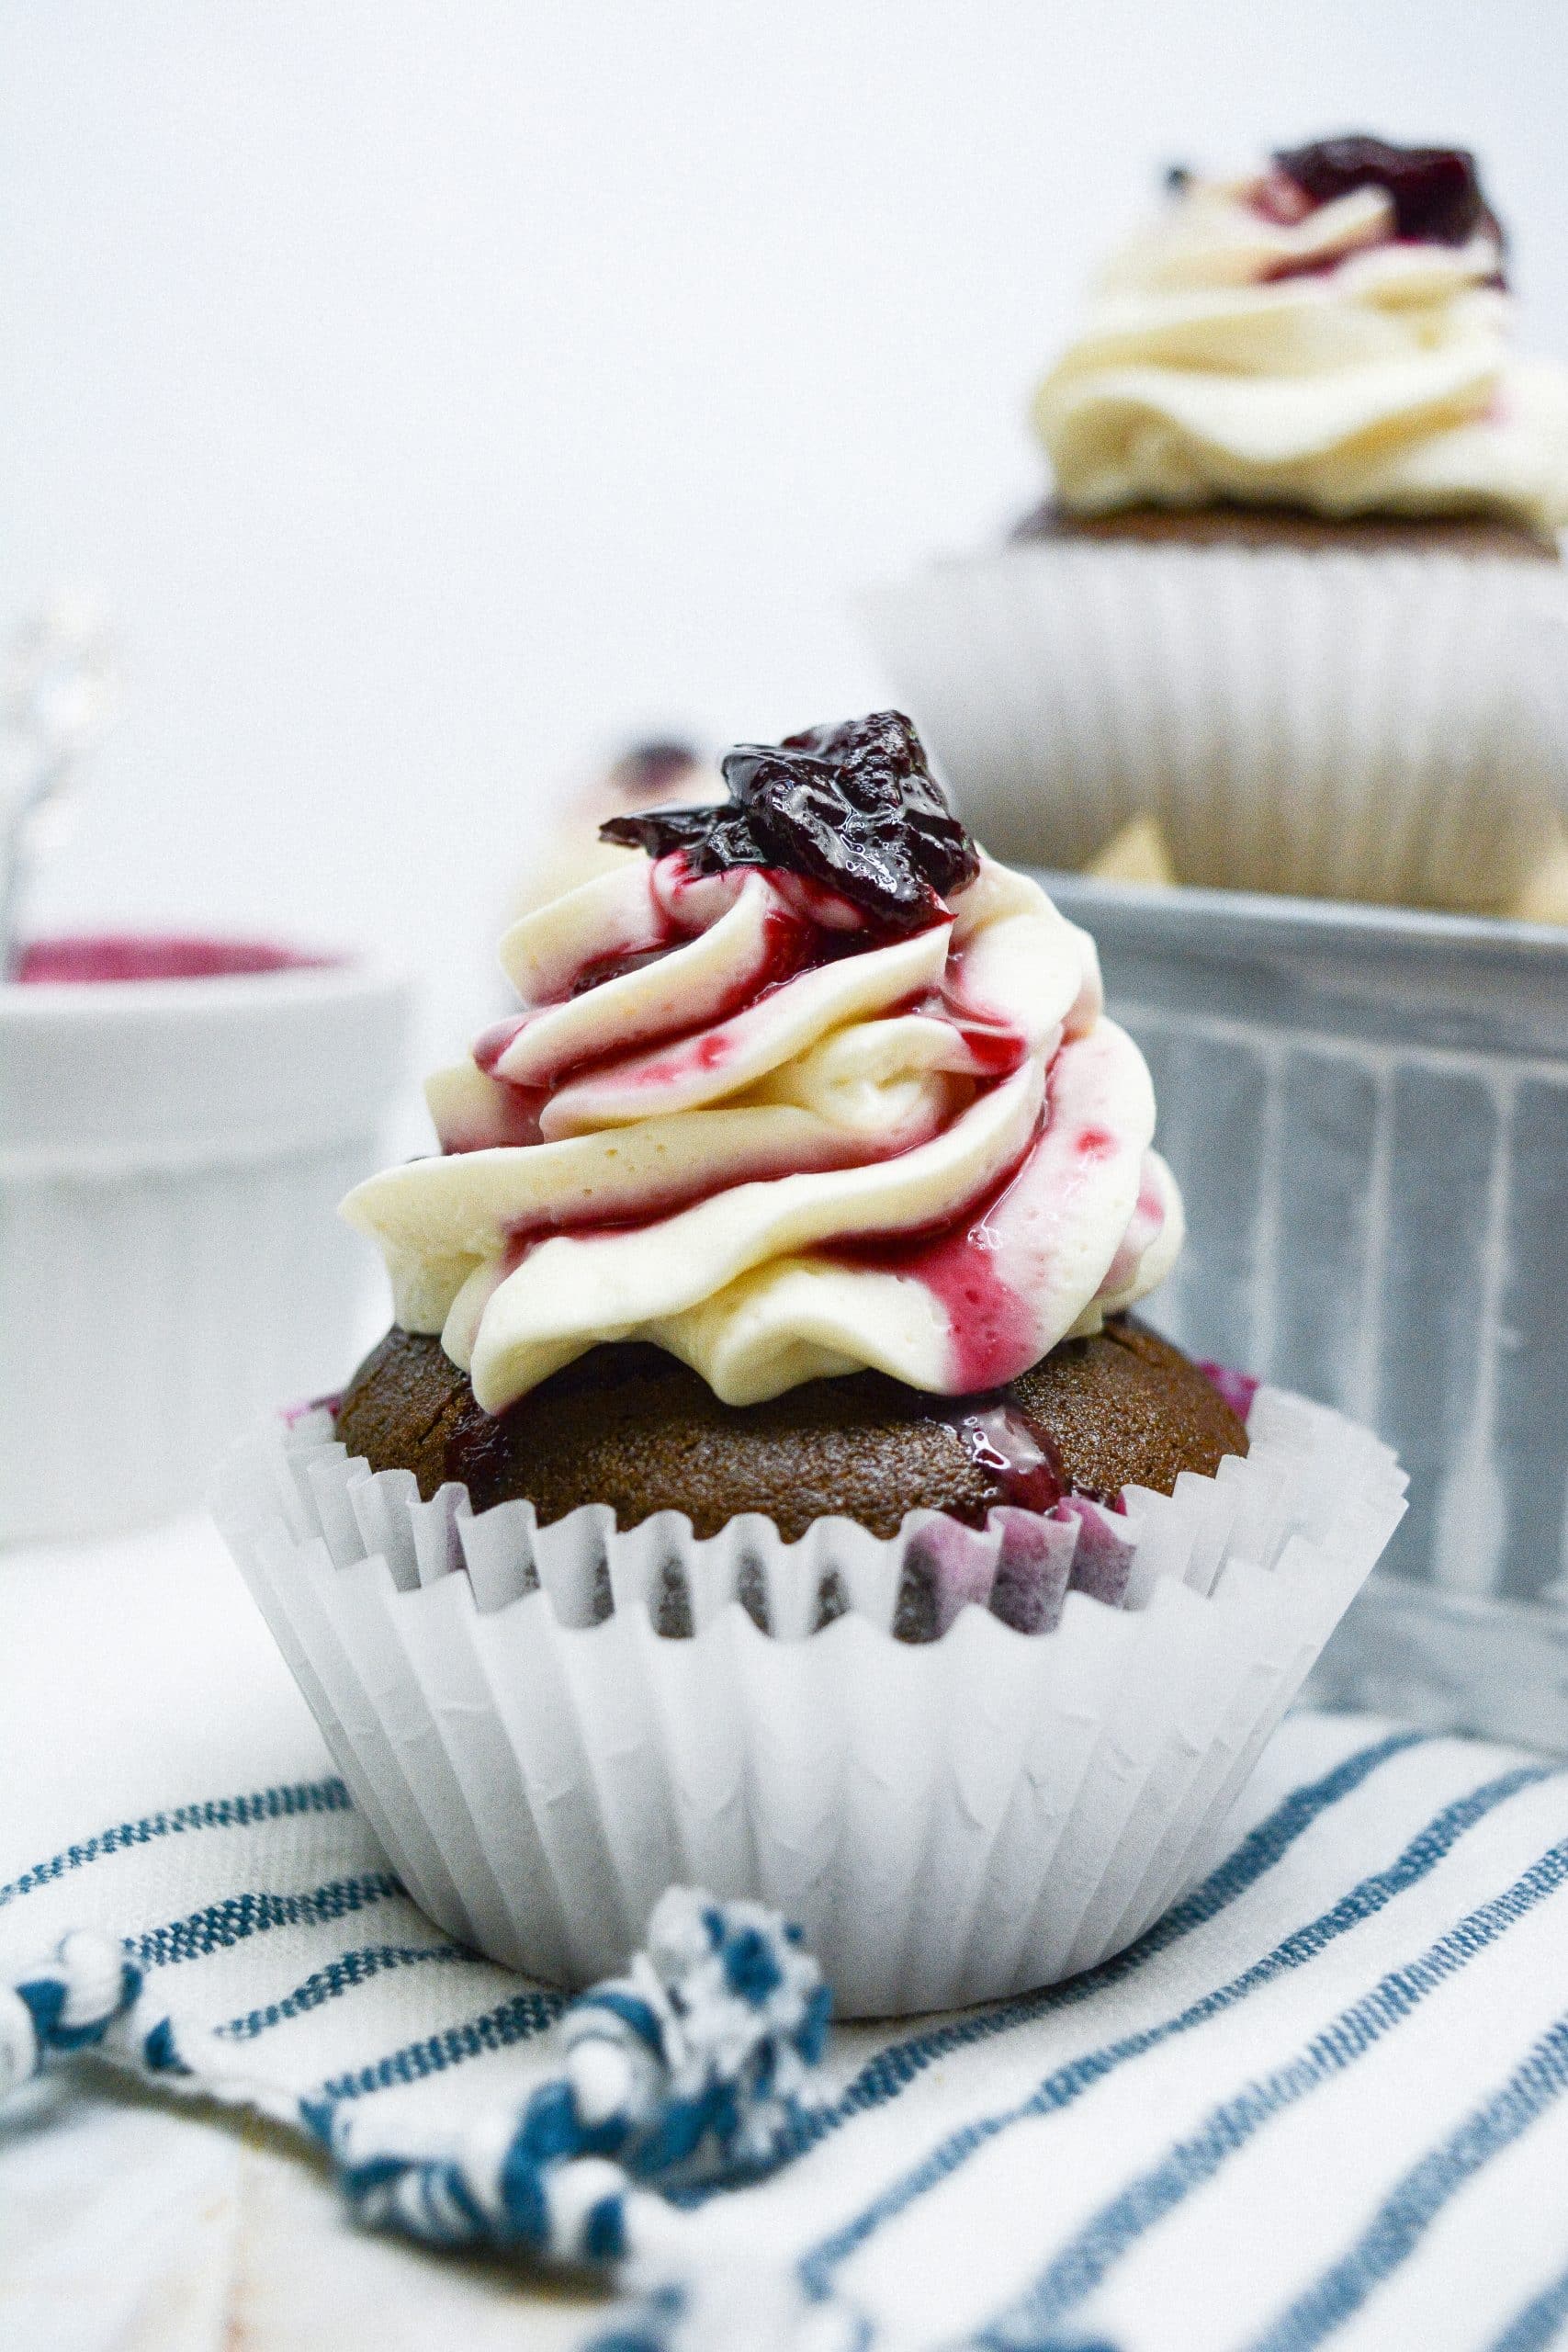 black forest cupcake sitting on a white and blue striped cloth napkin